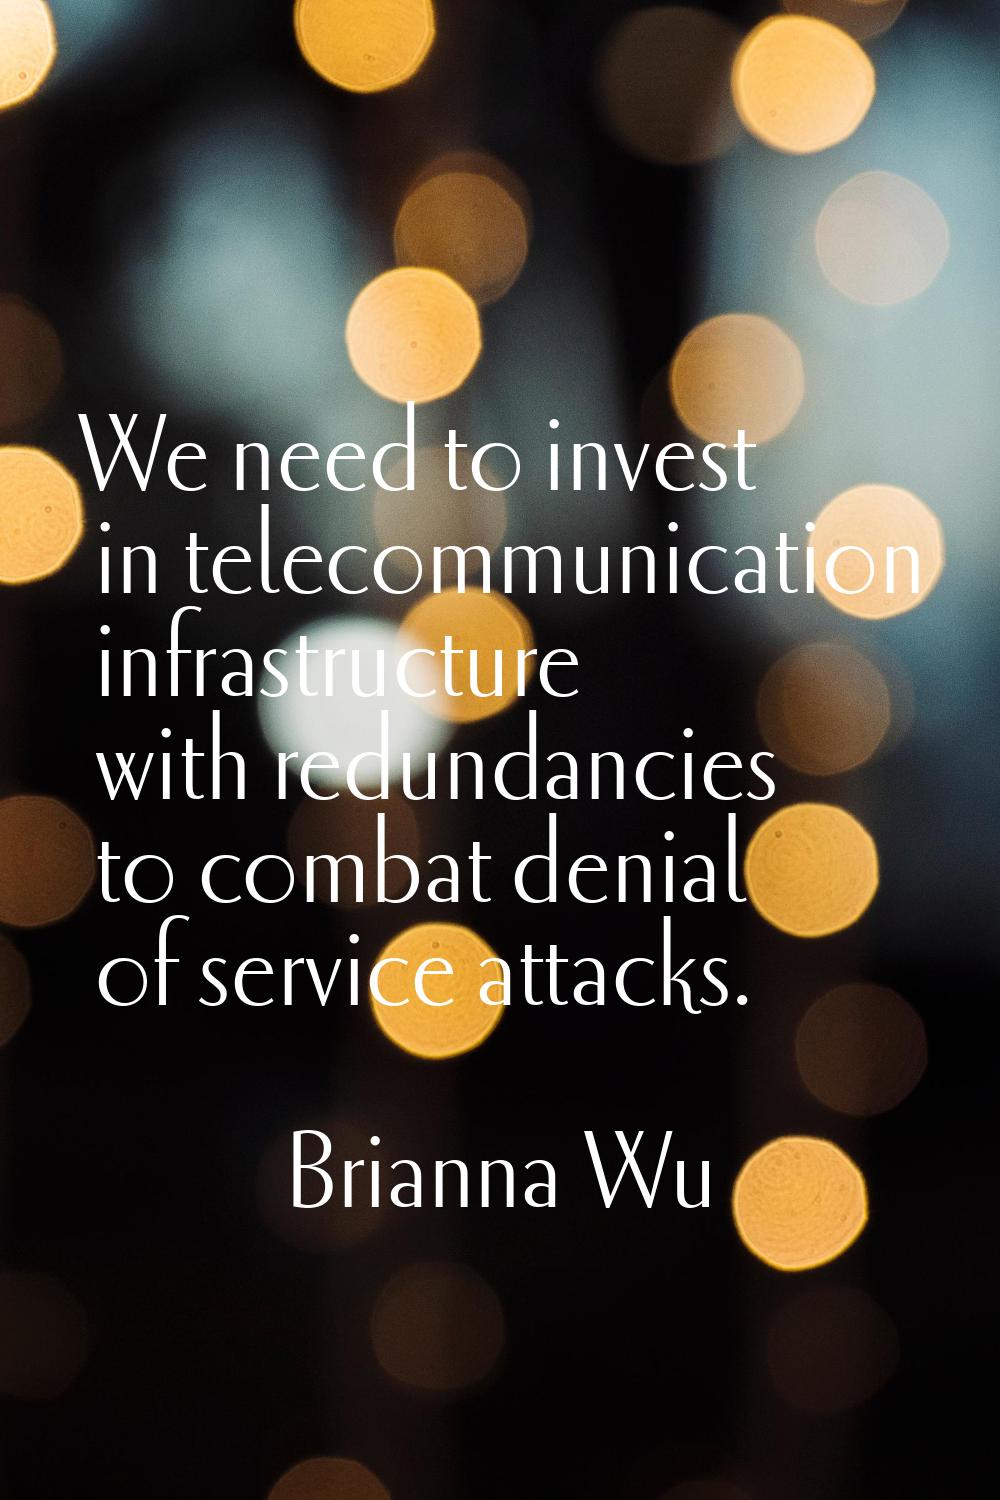 We need to invest in telecommunication infrastructure with redundancies to combat denial of service